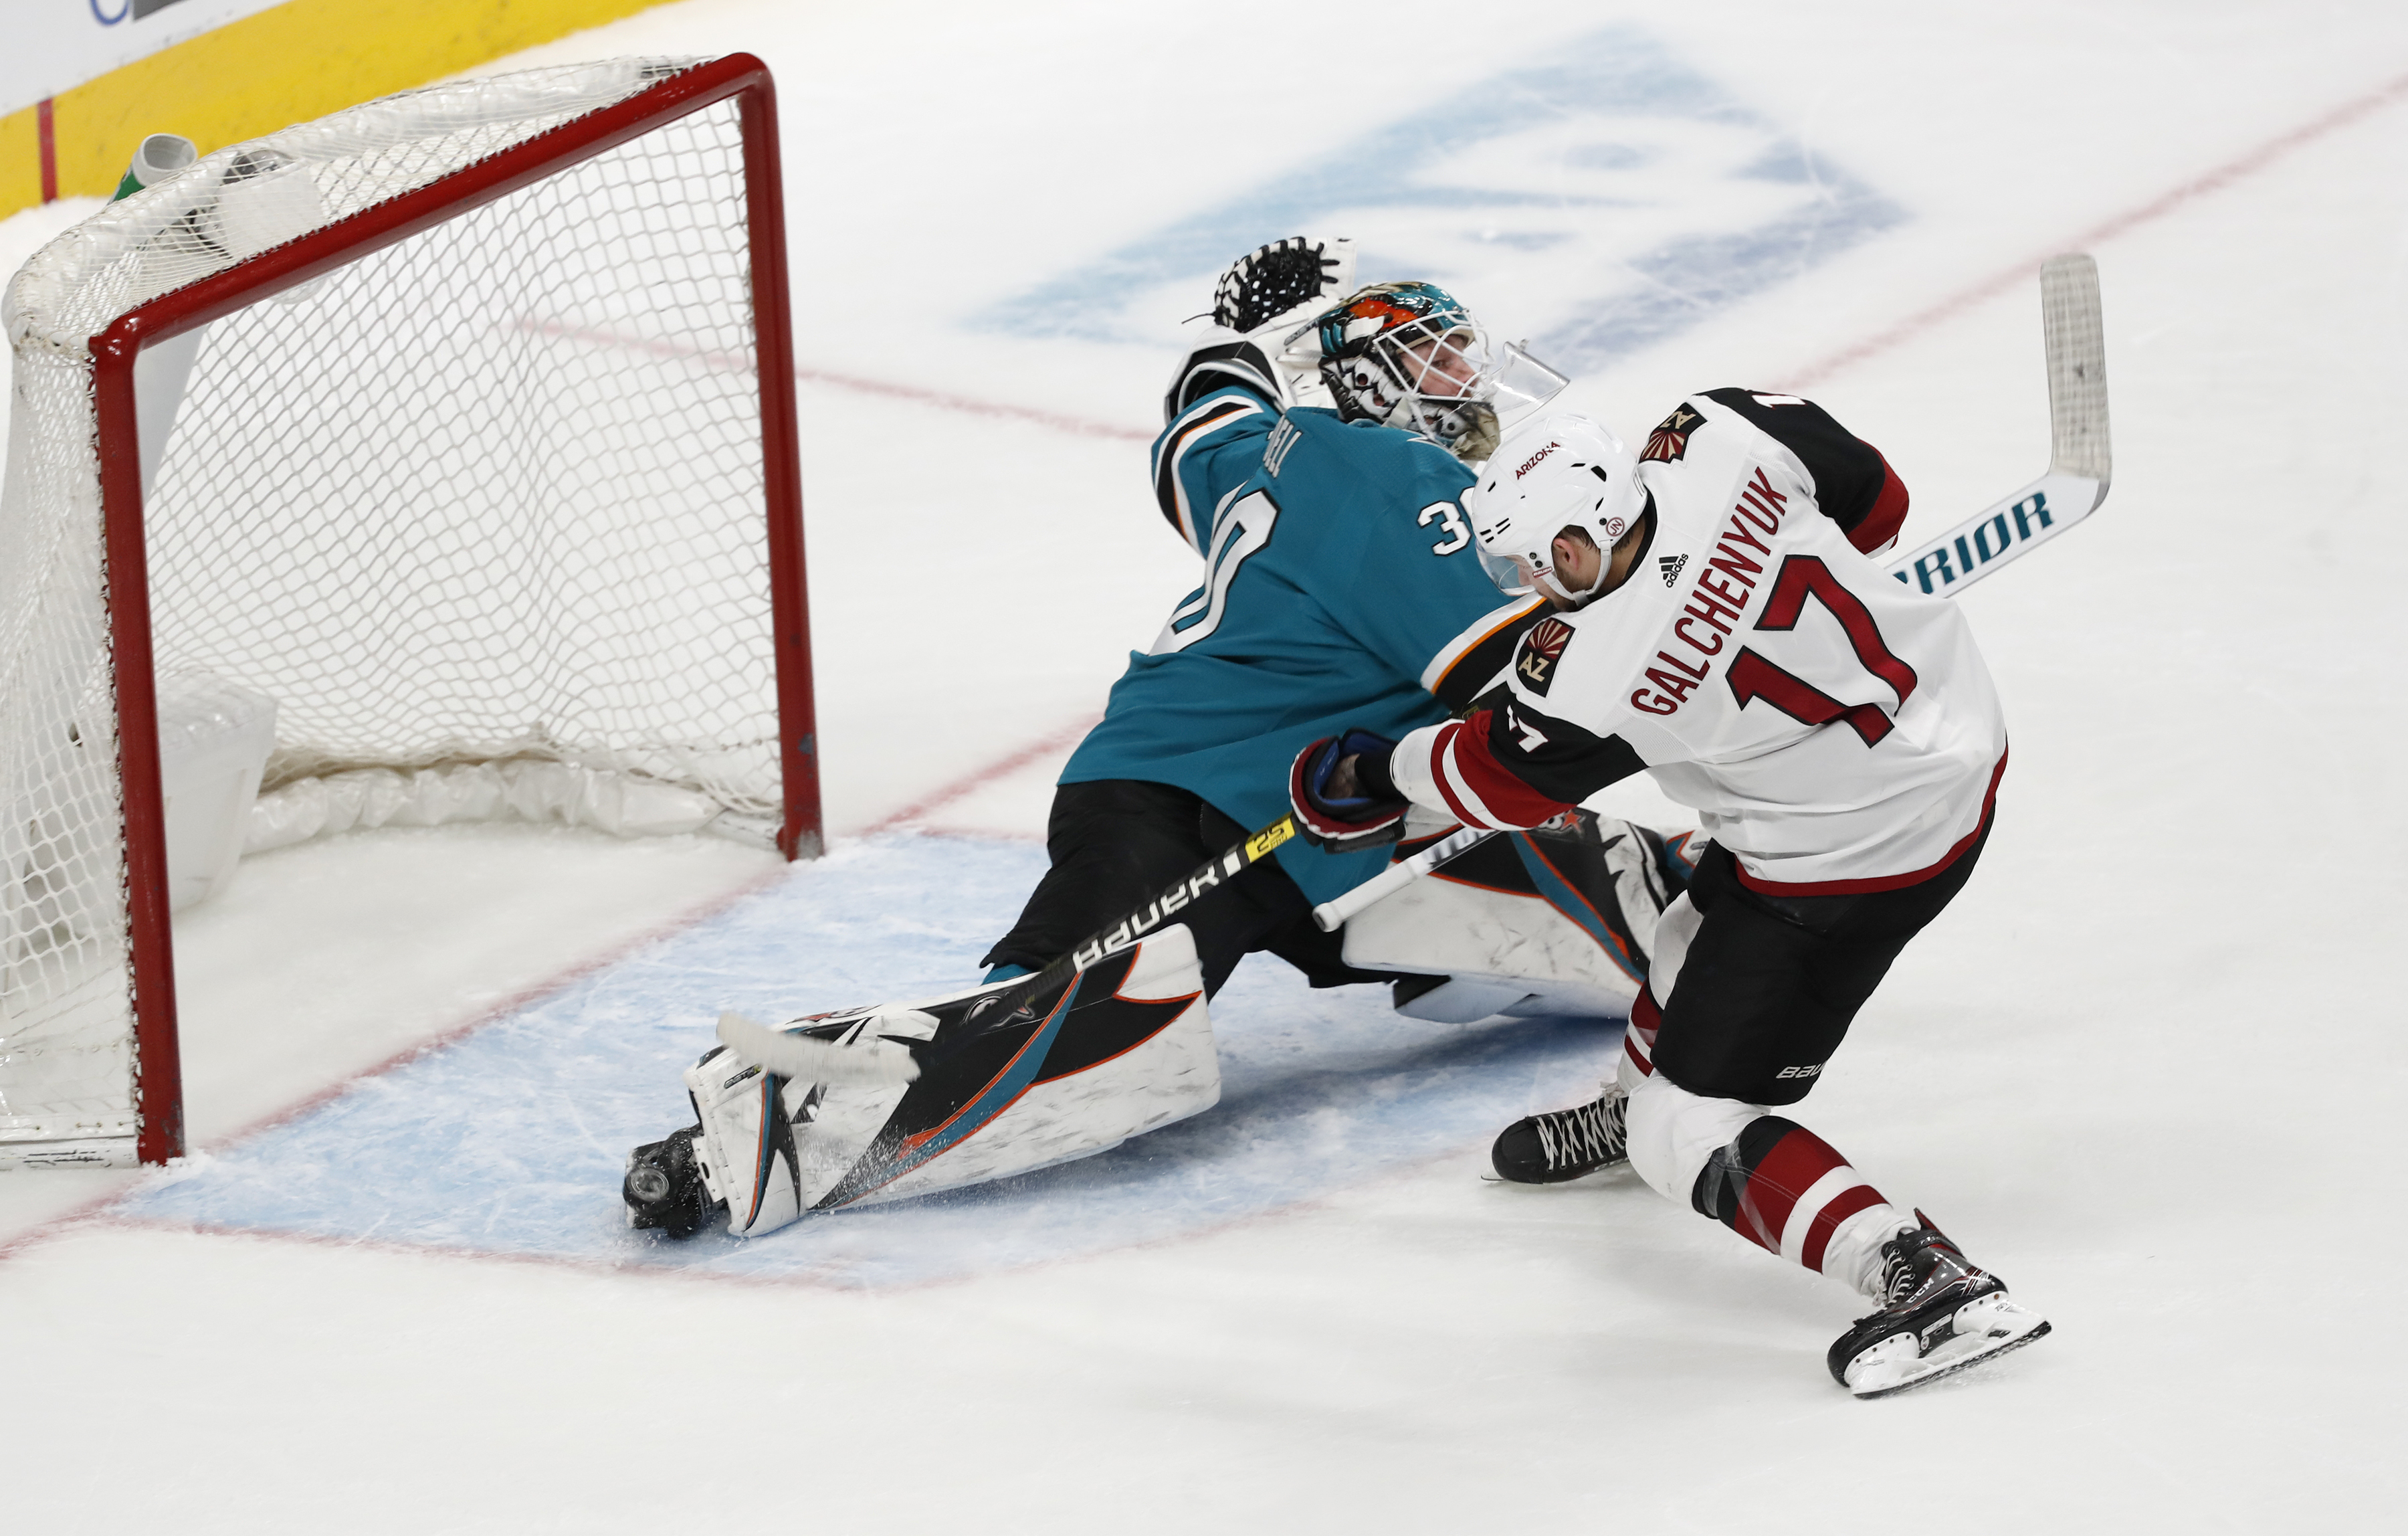 Galchenyuk leads Coyotes past Sharks 4-3 in shootout